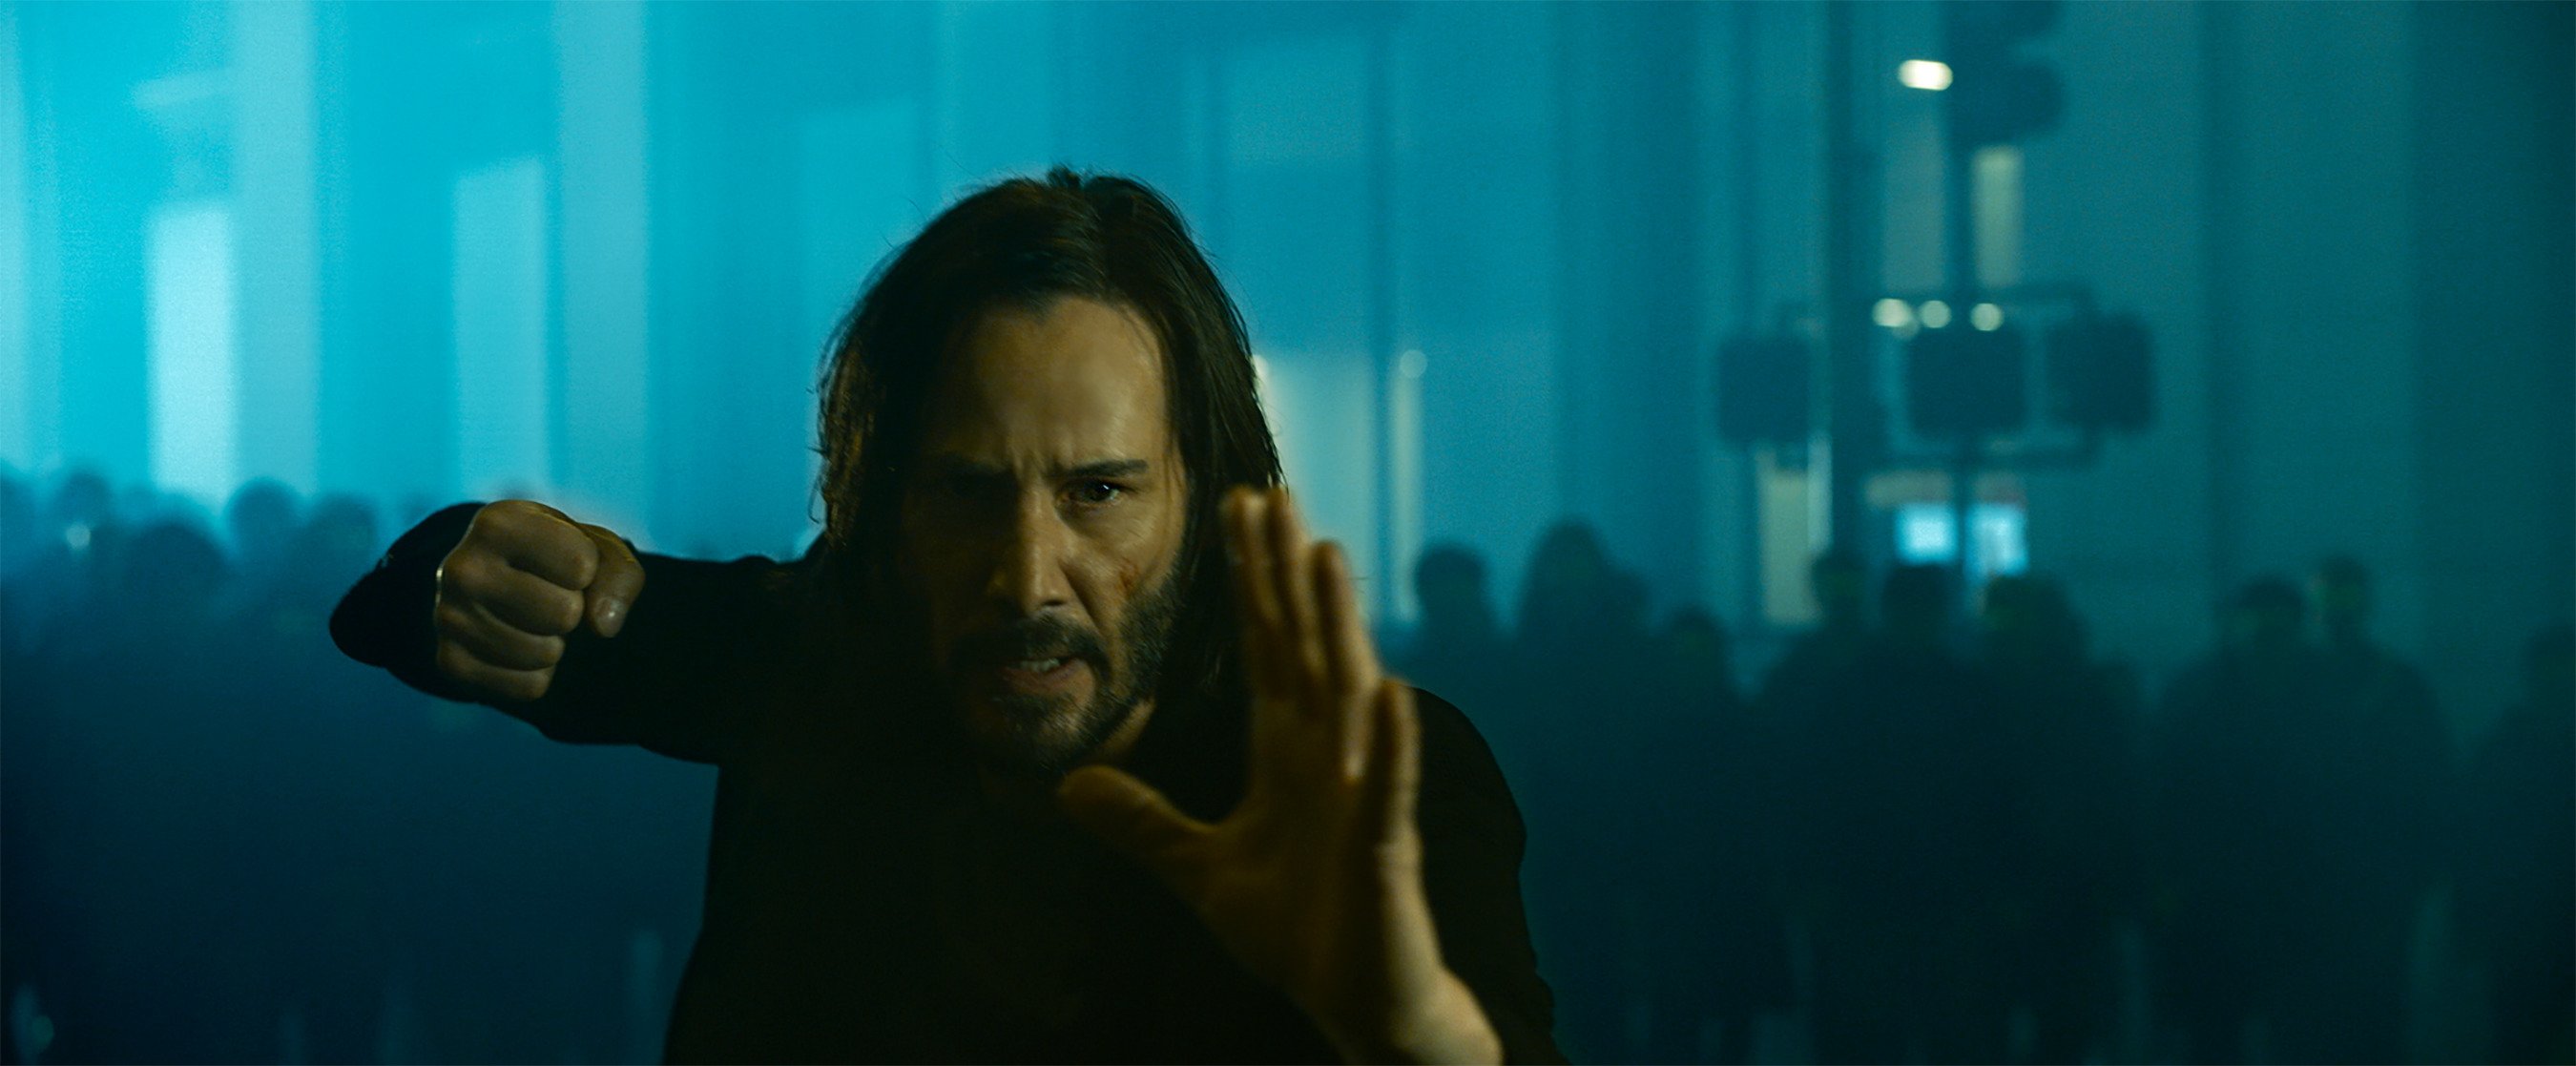 Keanu Reeves pulls back his fist in 'The Matrix Resurrections'